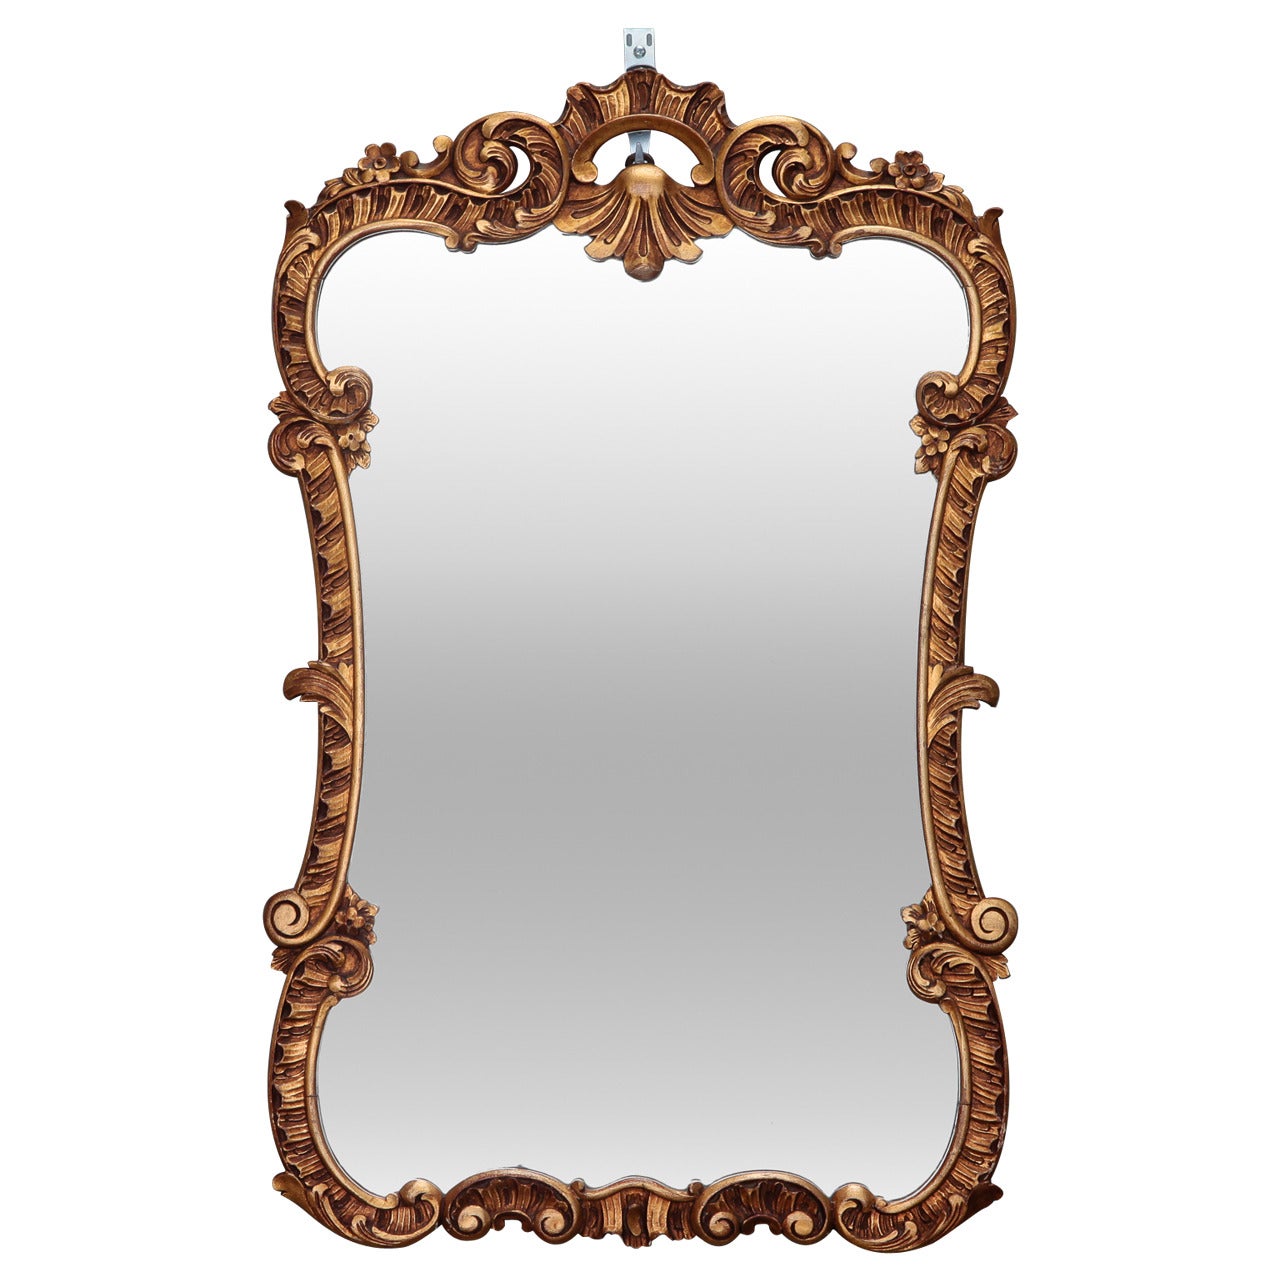 Italian Giltwood Mirror with Open Work Crest